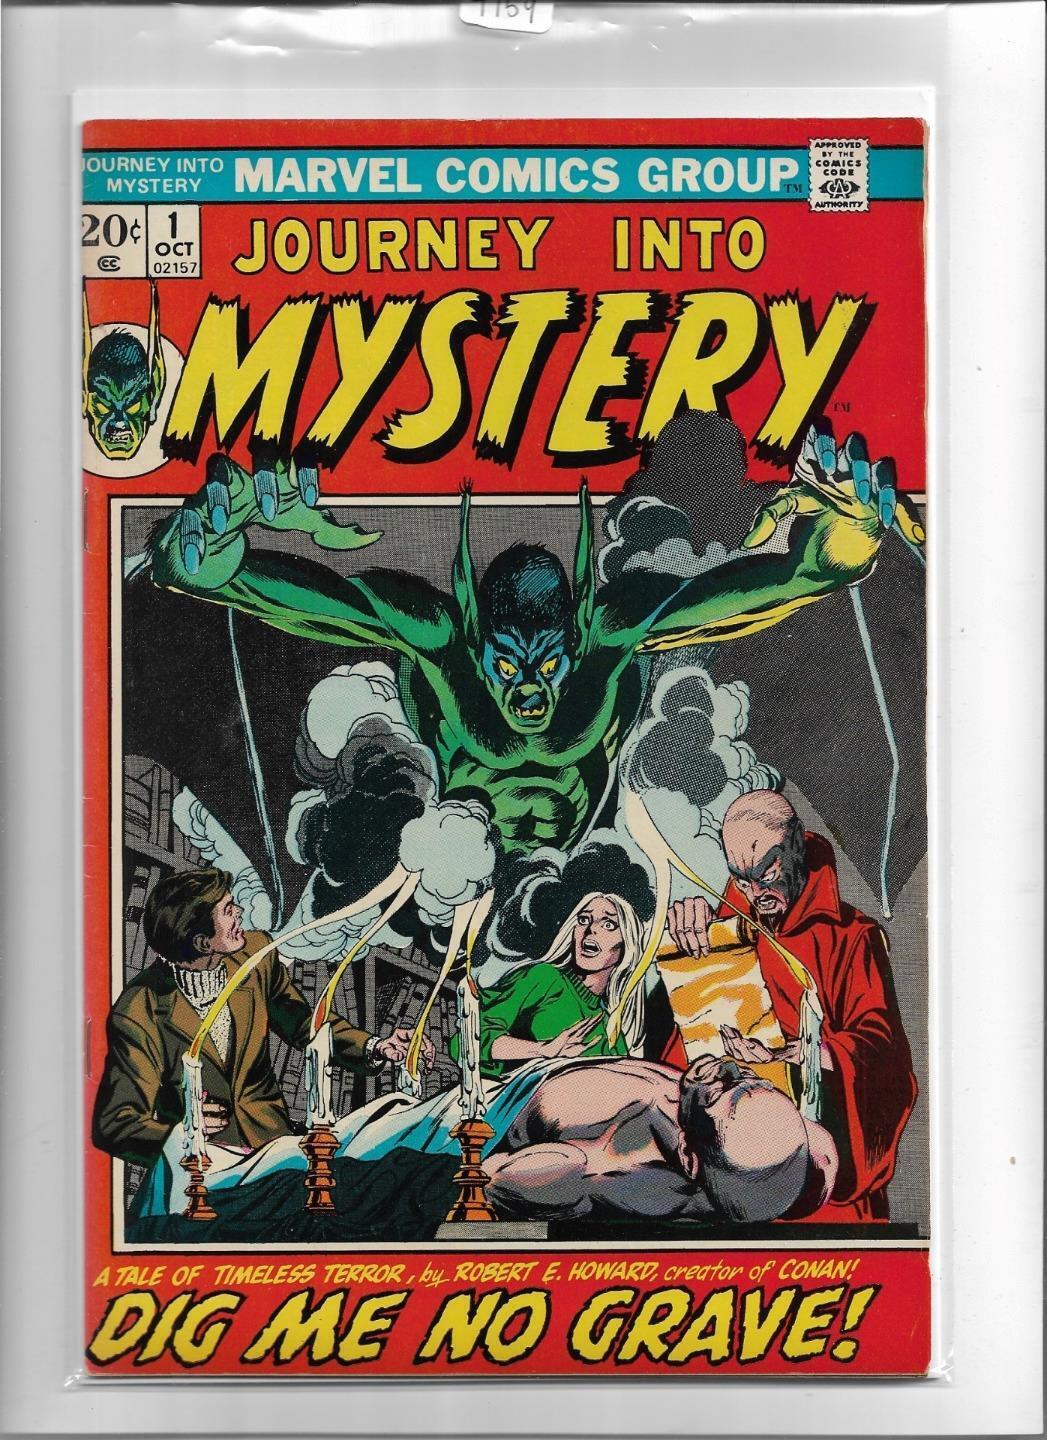 JOURNEY INTO MYSTERY #1 1972 VERY FINE+ 8.5 4759 cover tanning